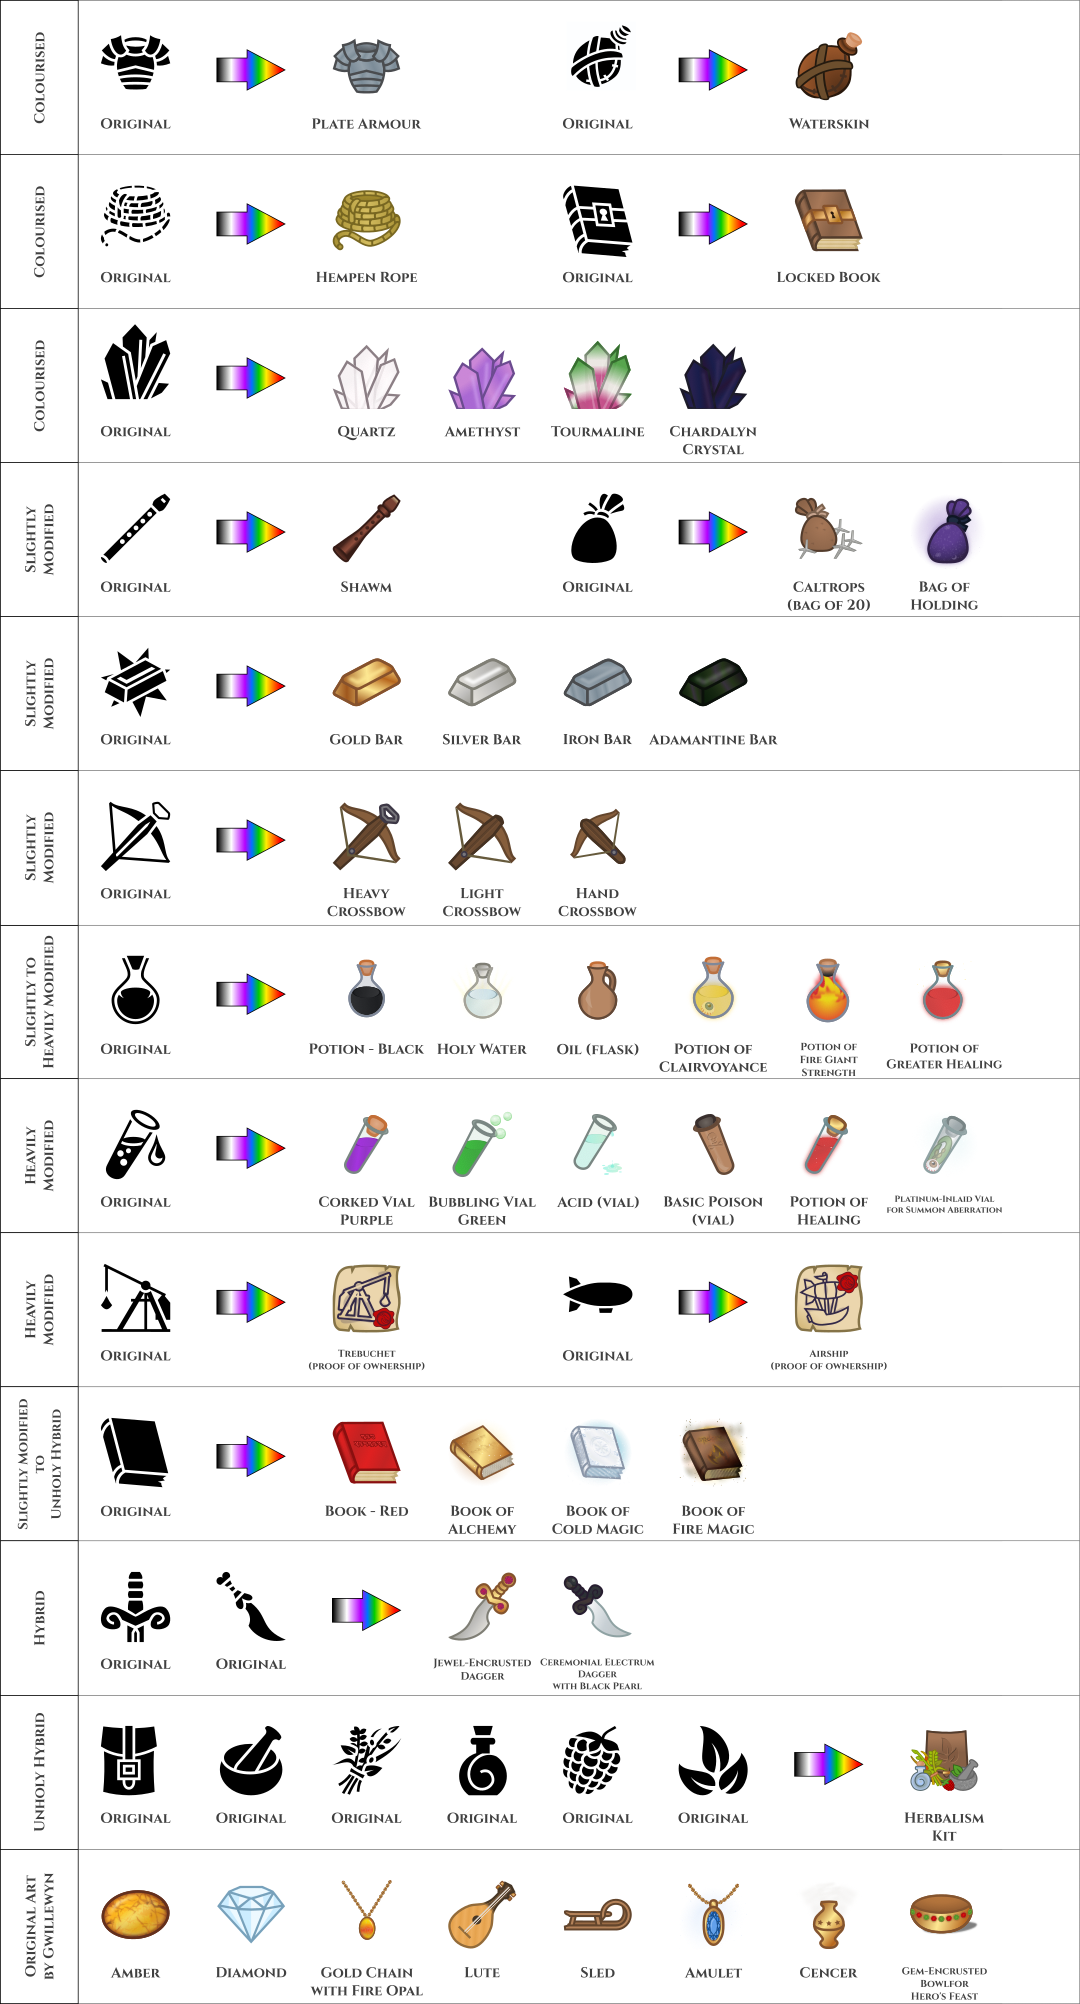 Examples of original icons and modified versions